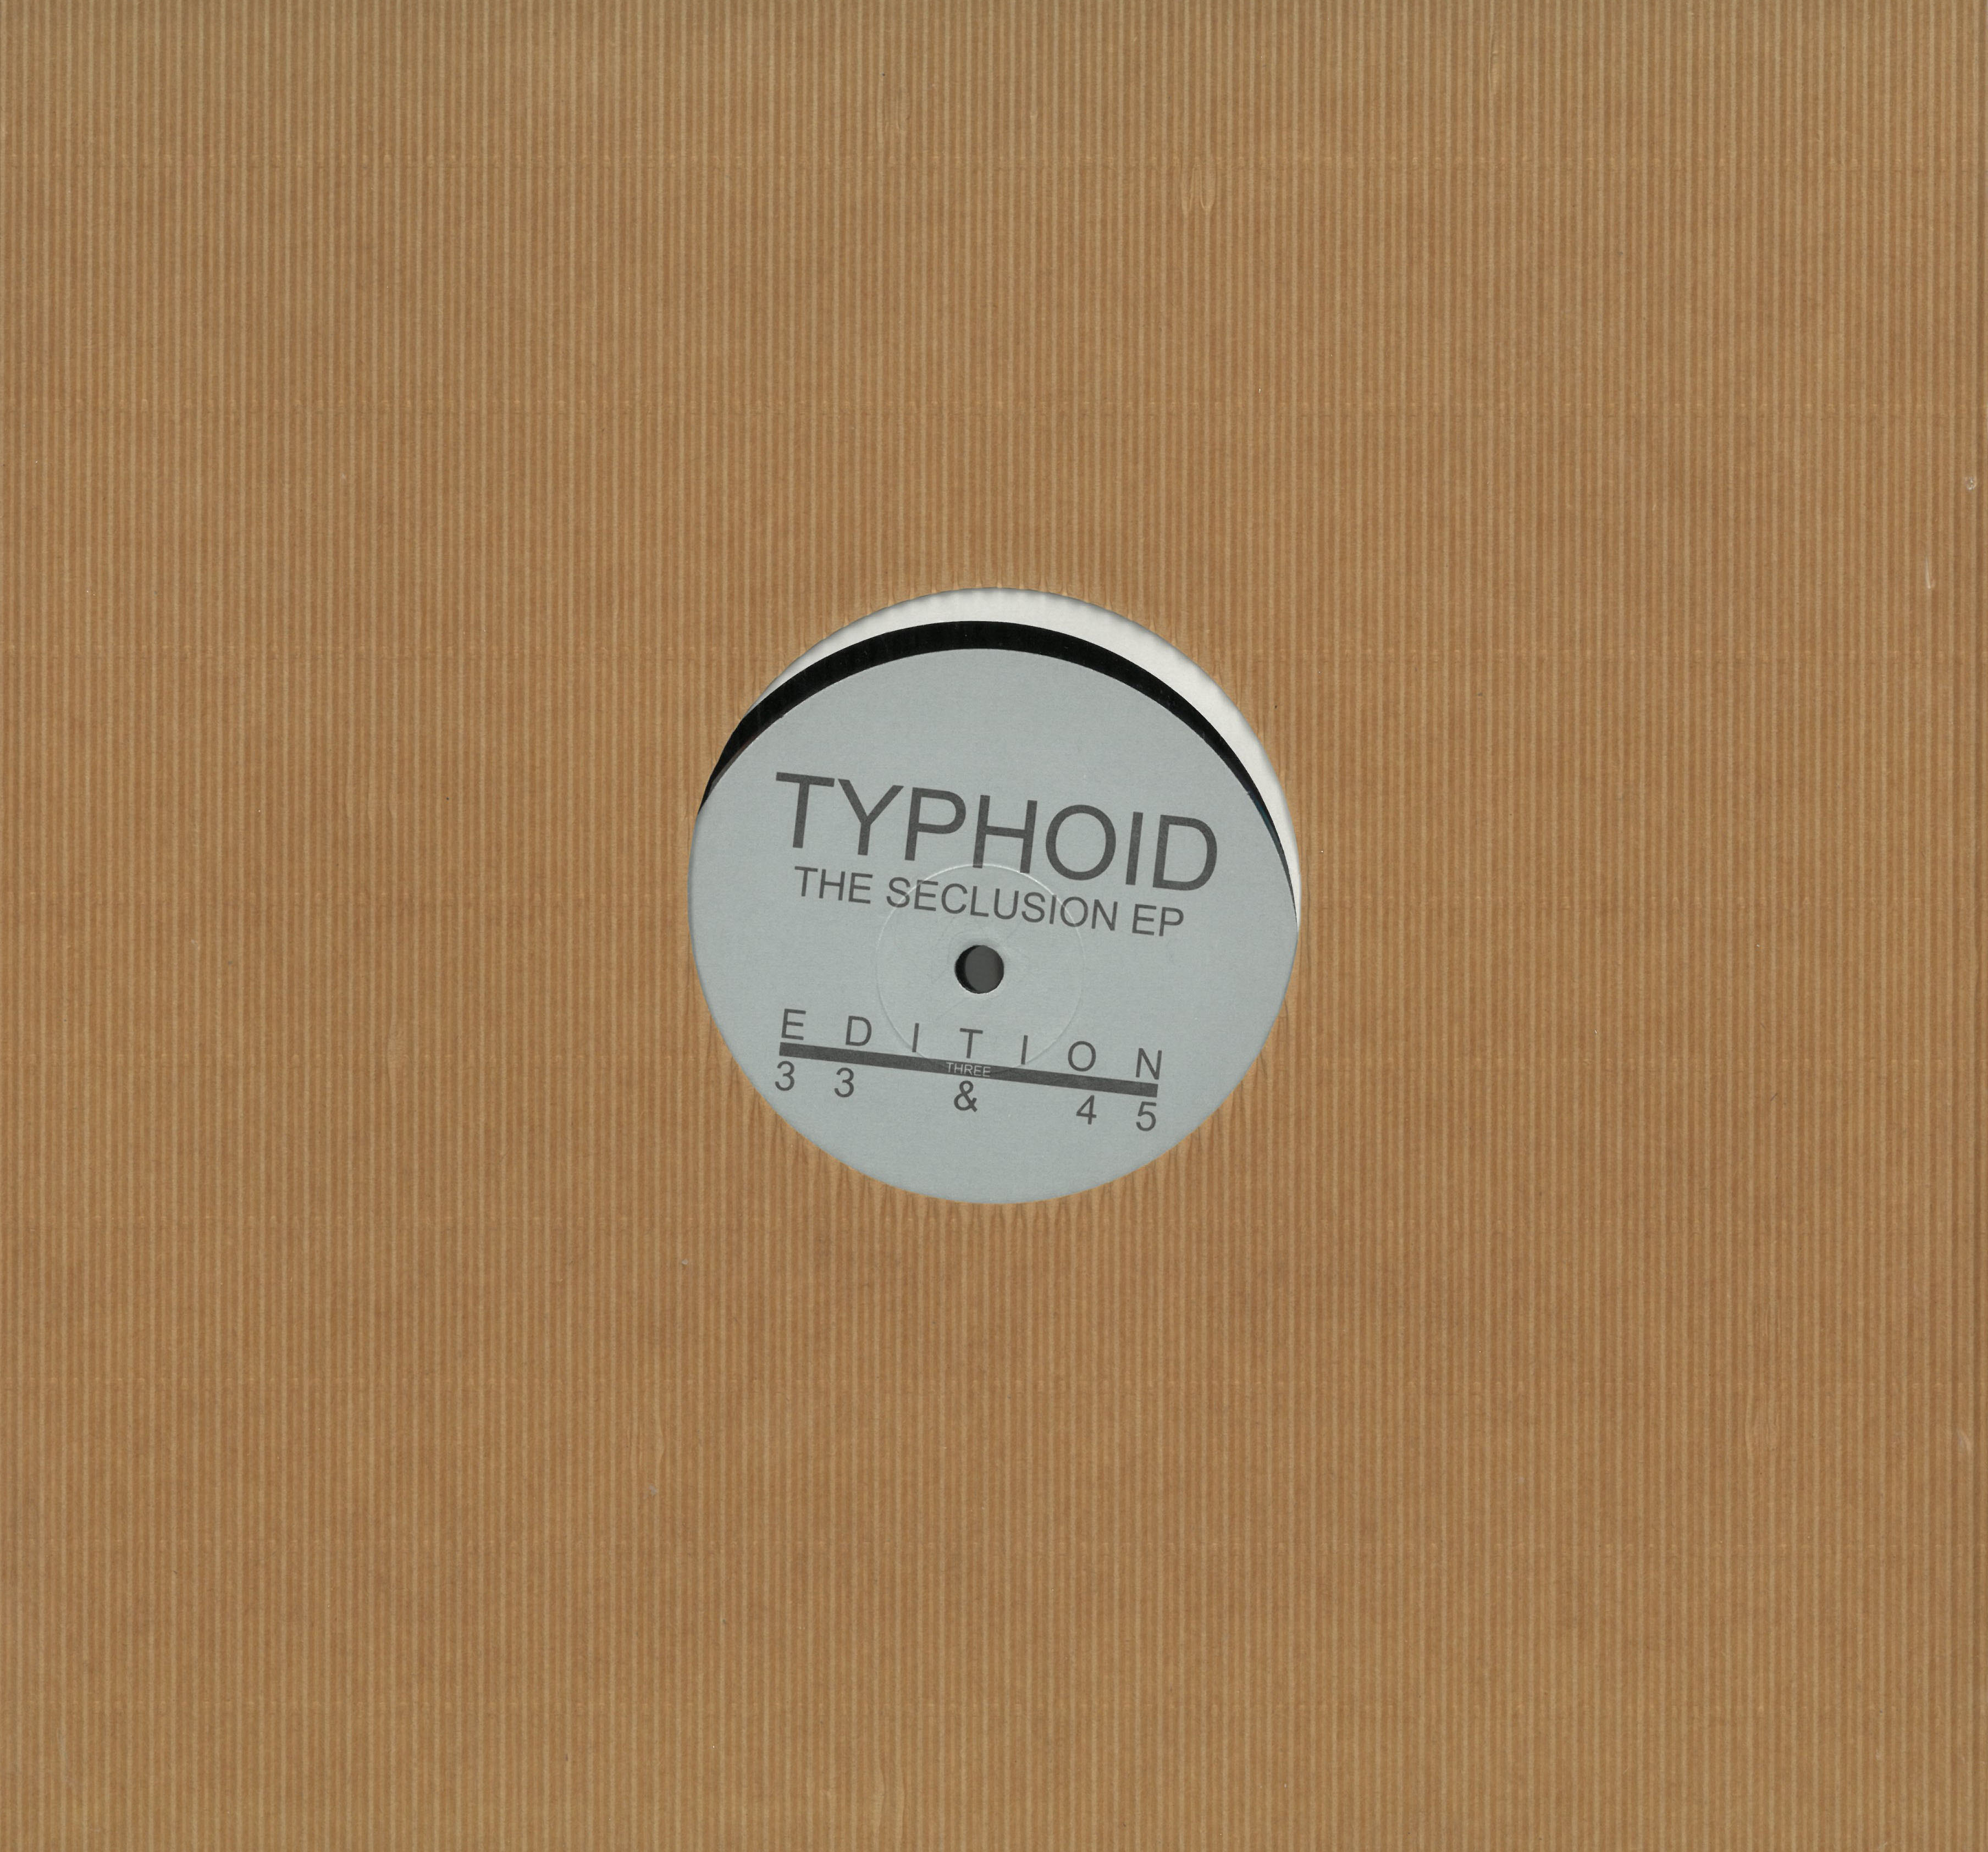 Typhoid Seclusion EP